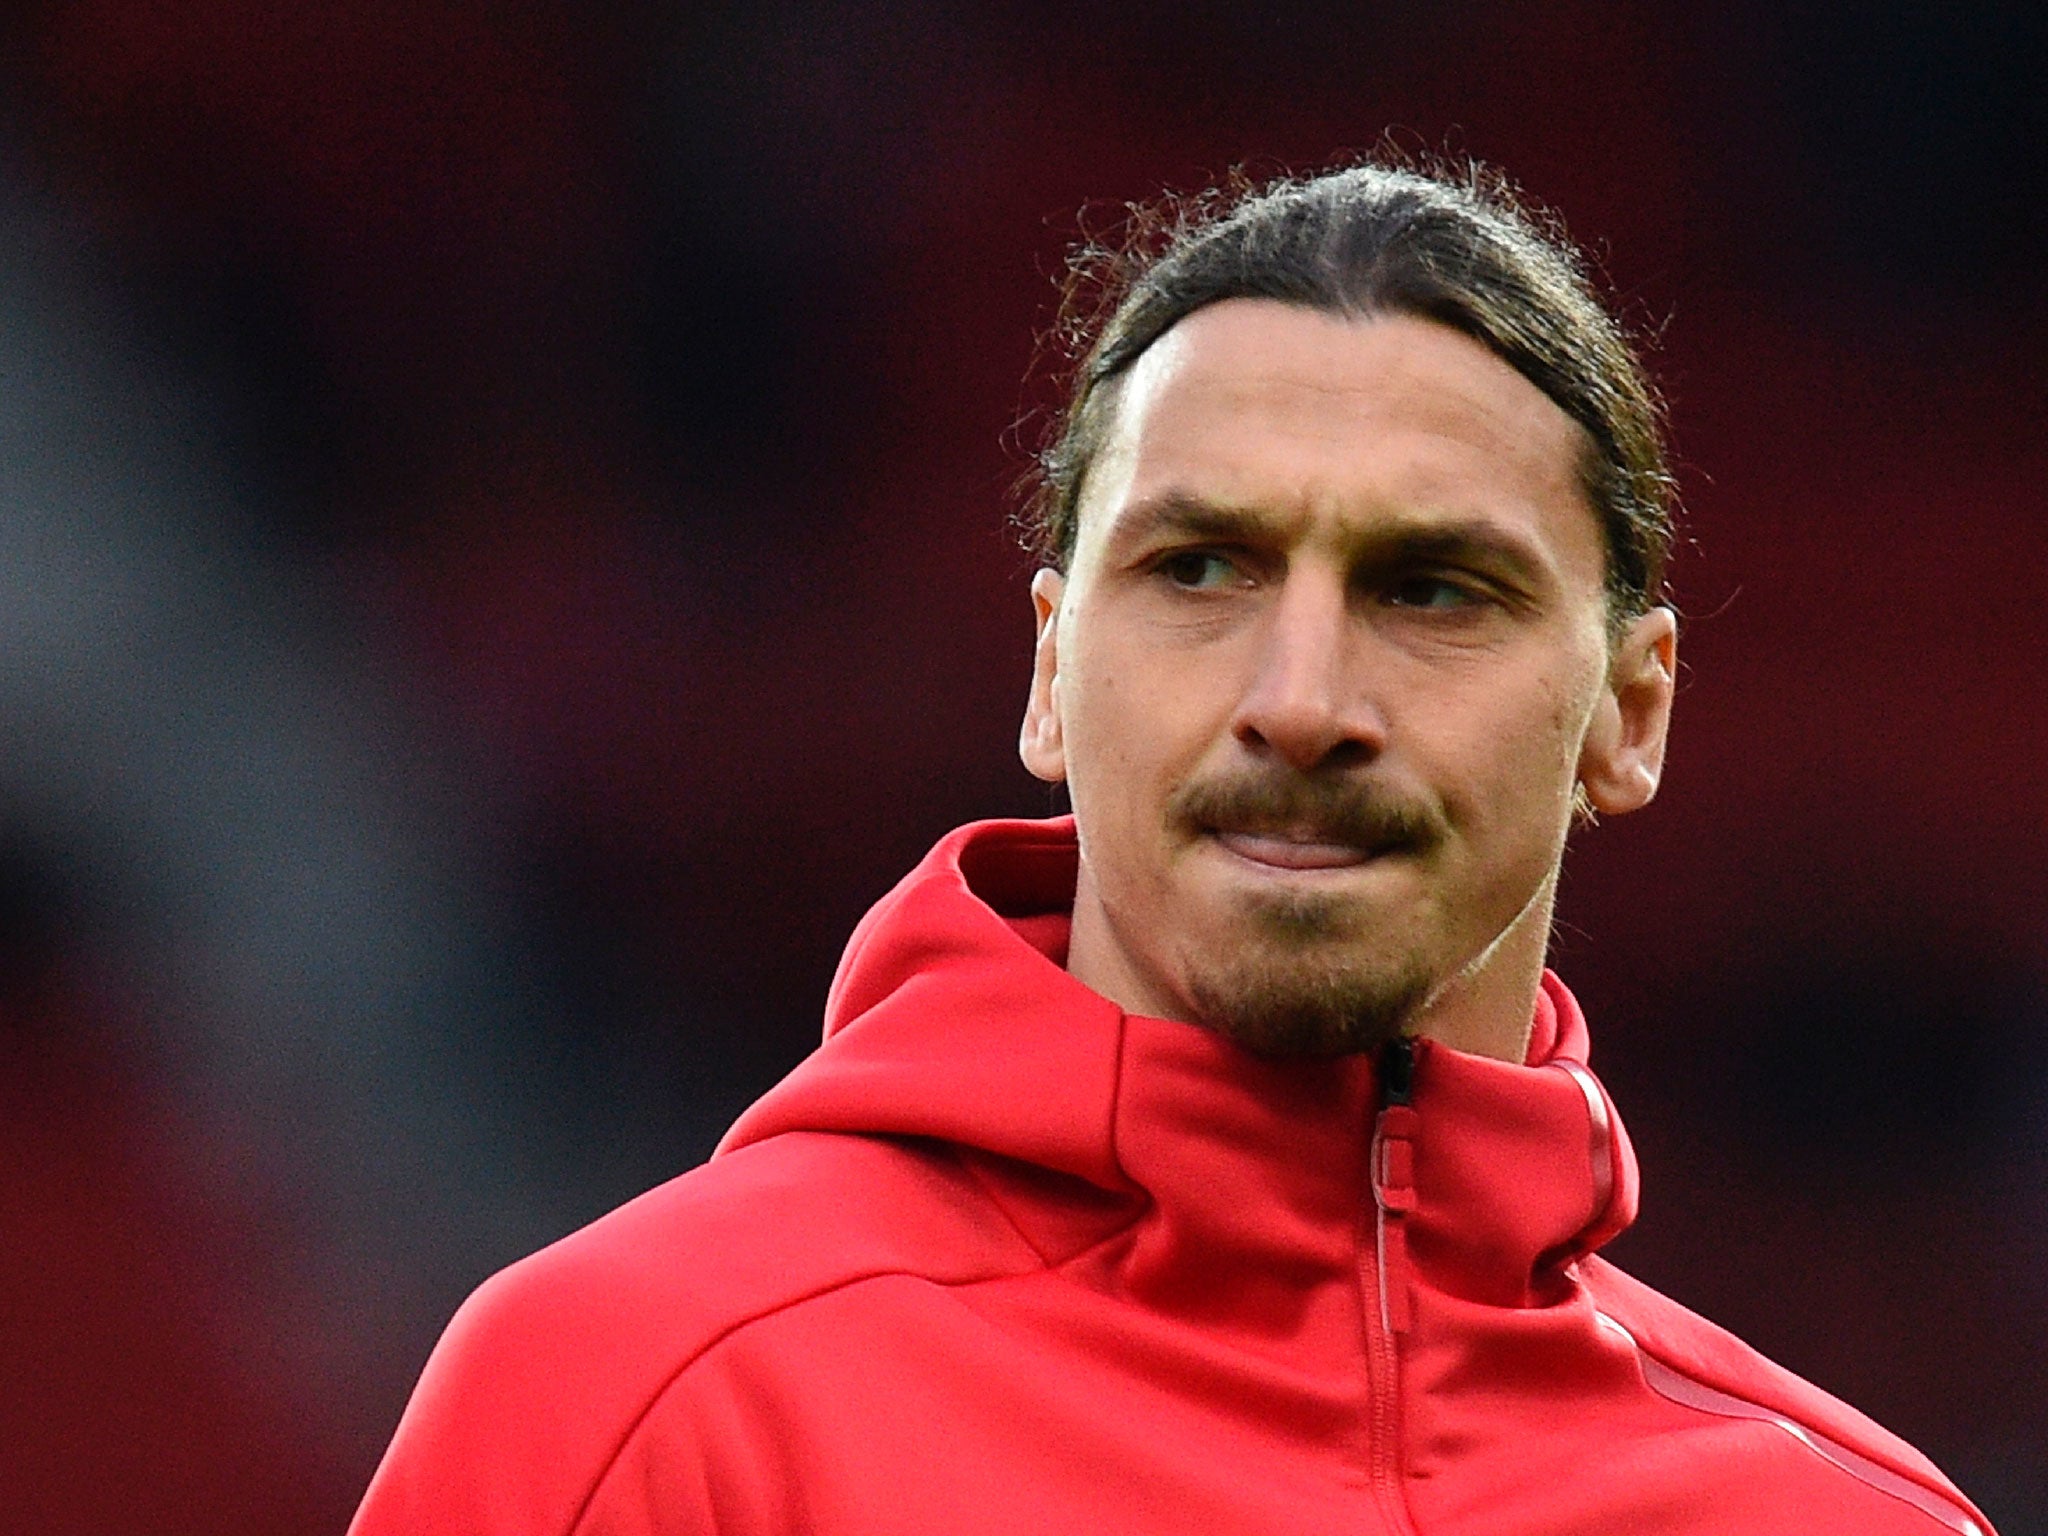 Zlatan Ibrahimovic's Manchester United career could be over